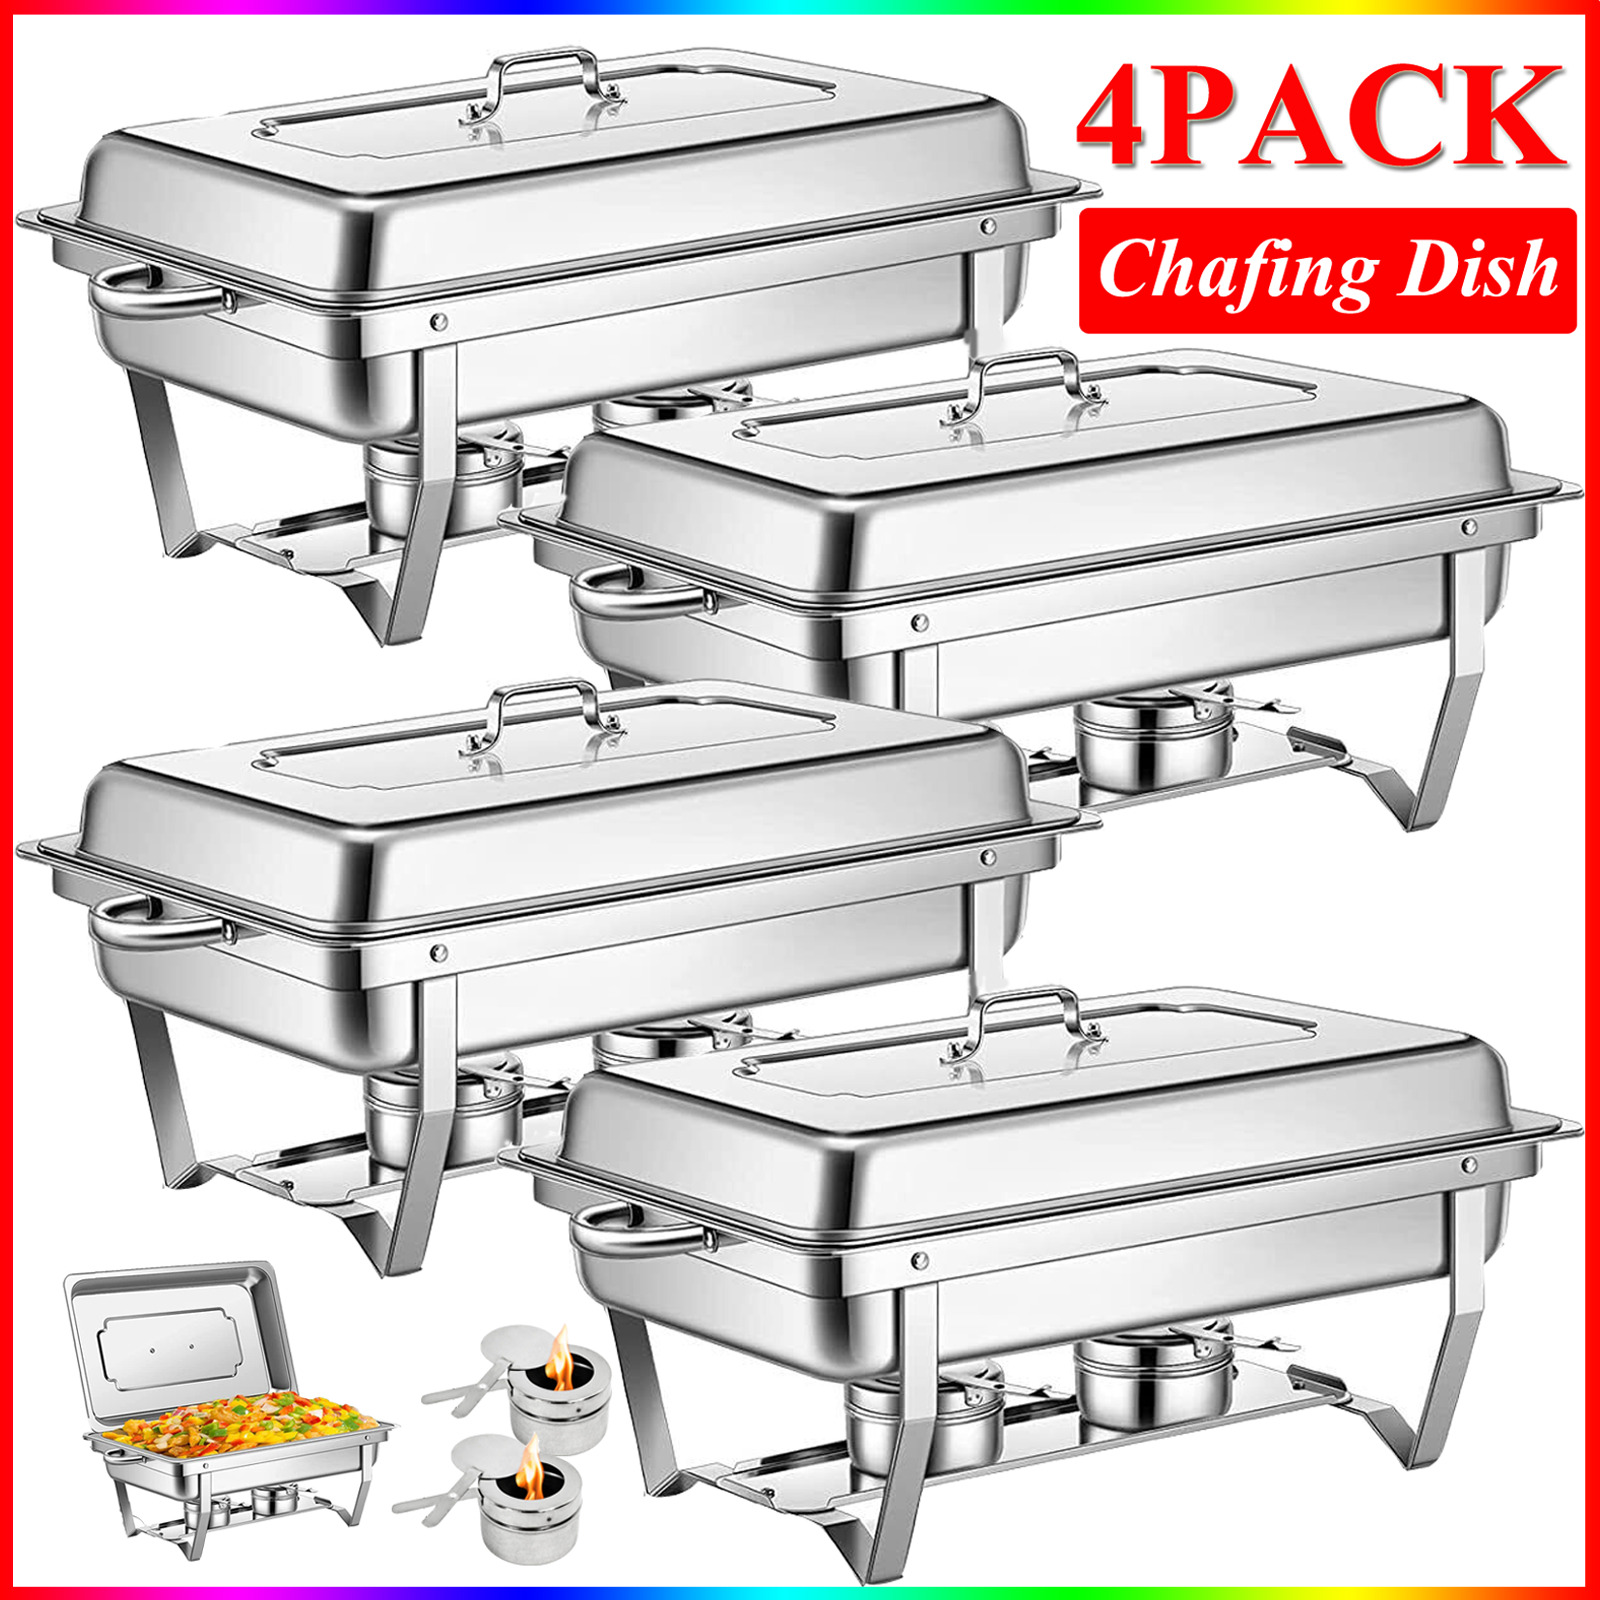 4 Pack 13.7 QT Stainless Steel Chafer Chafing Dish Sets Catering Food Warmer